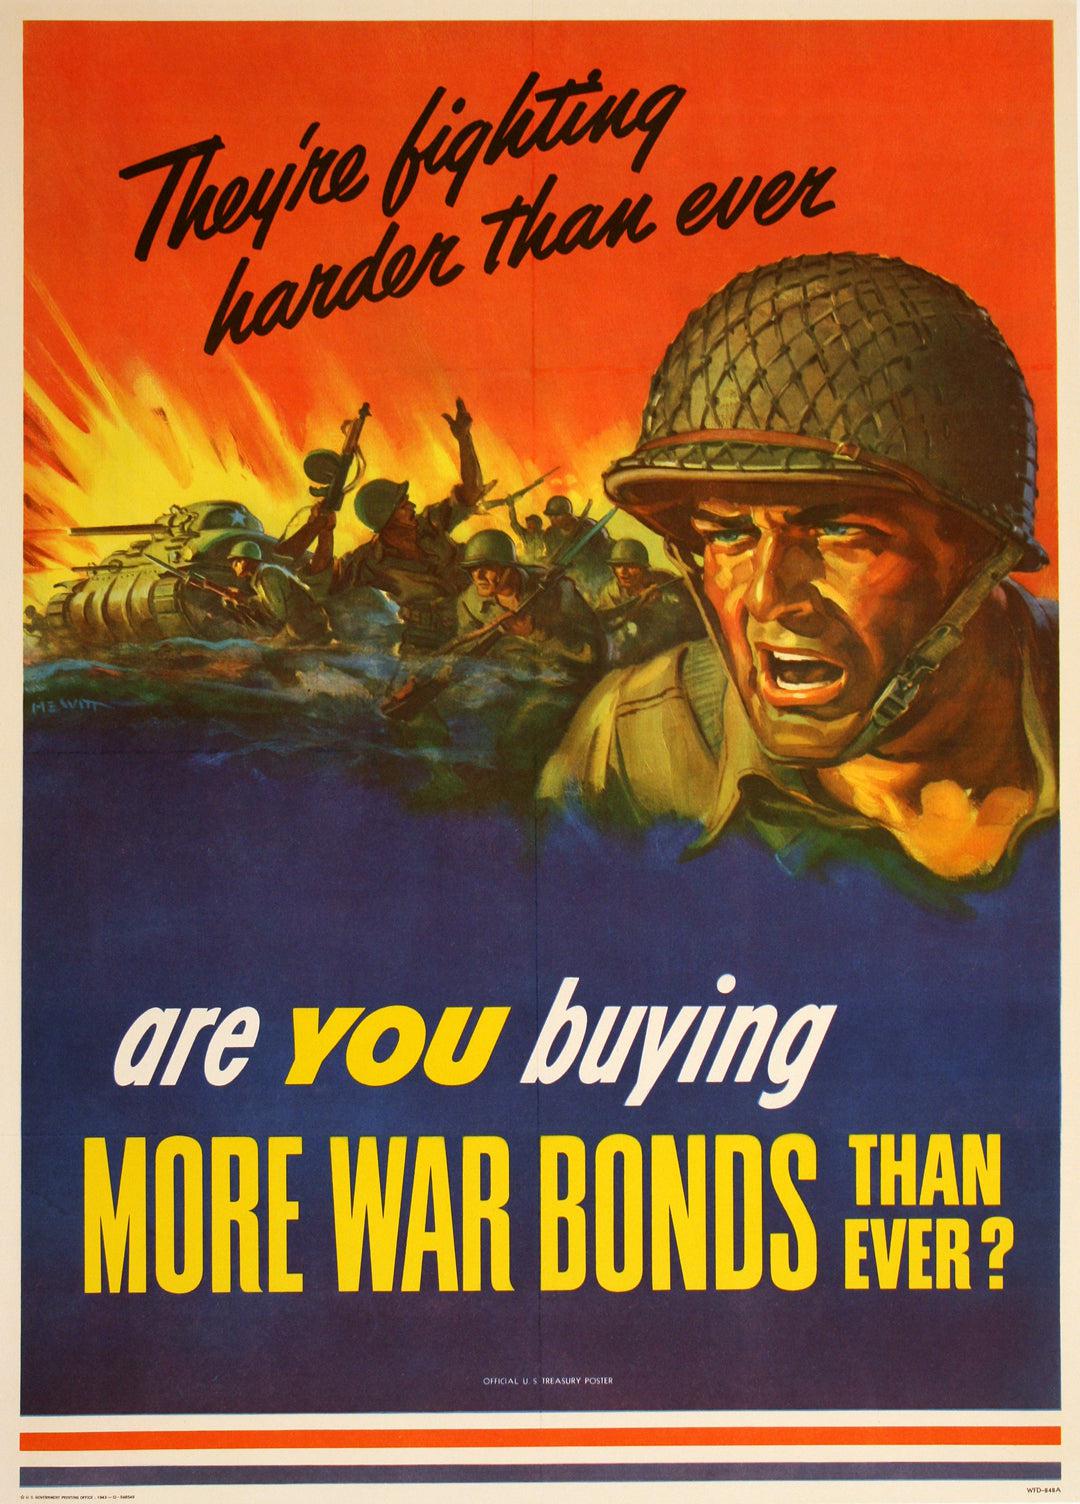 They're Fighting Harder Than Ever Original Vintage WWII Poster 1943 by Hewitt